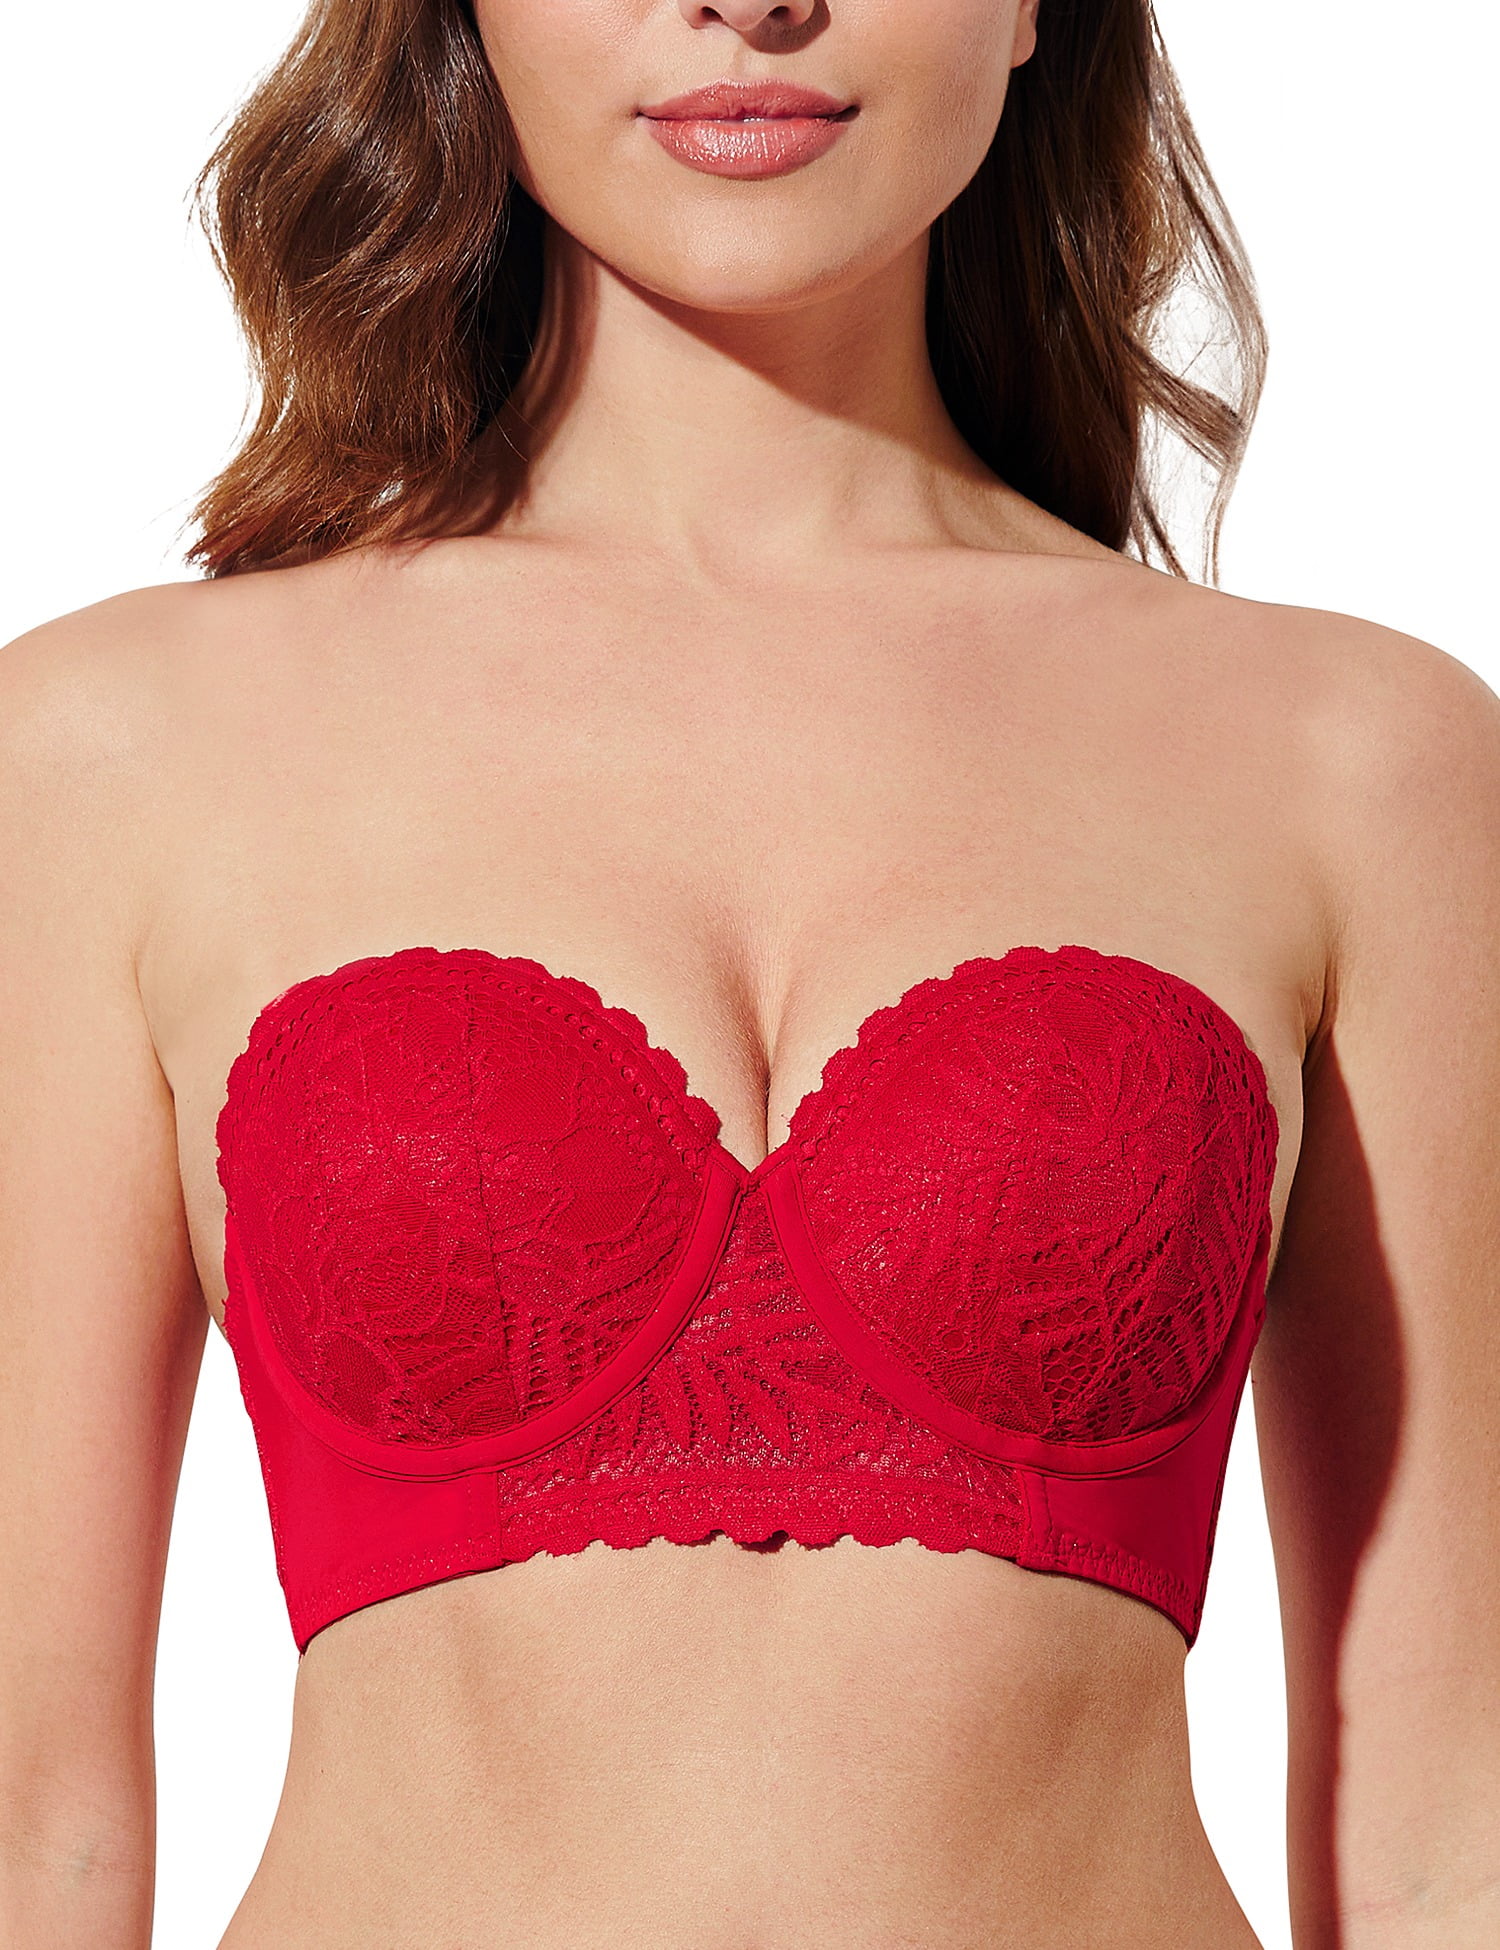  Womens Plus Size Bras Full Coverage Lace Underwire Unlined  Bra Up To J Lipstick Red 34F